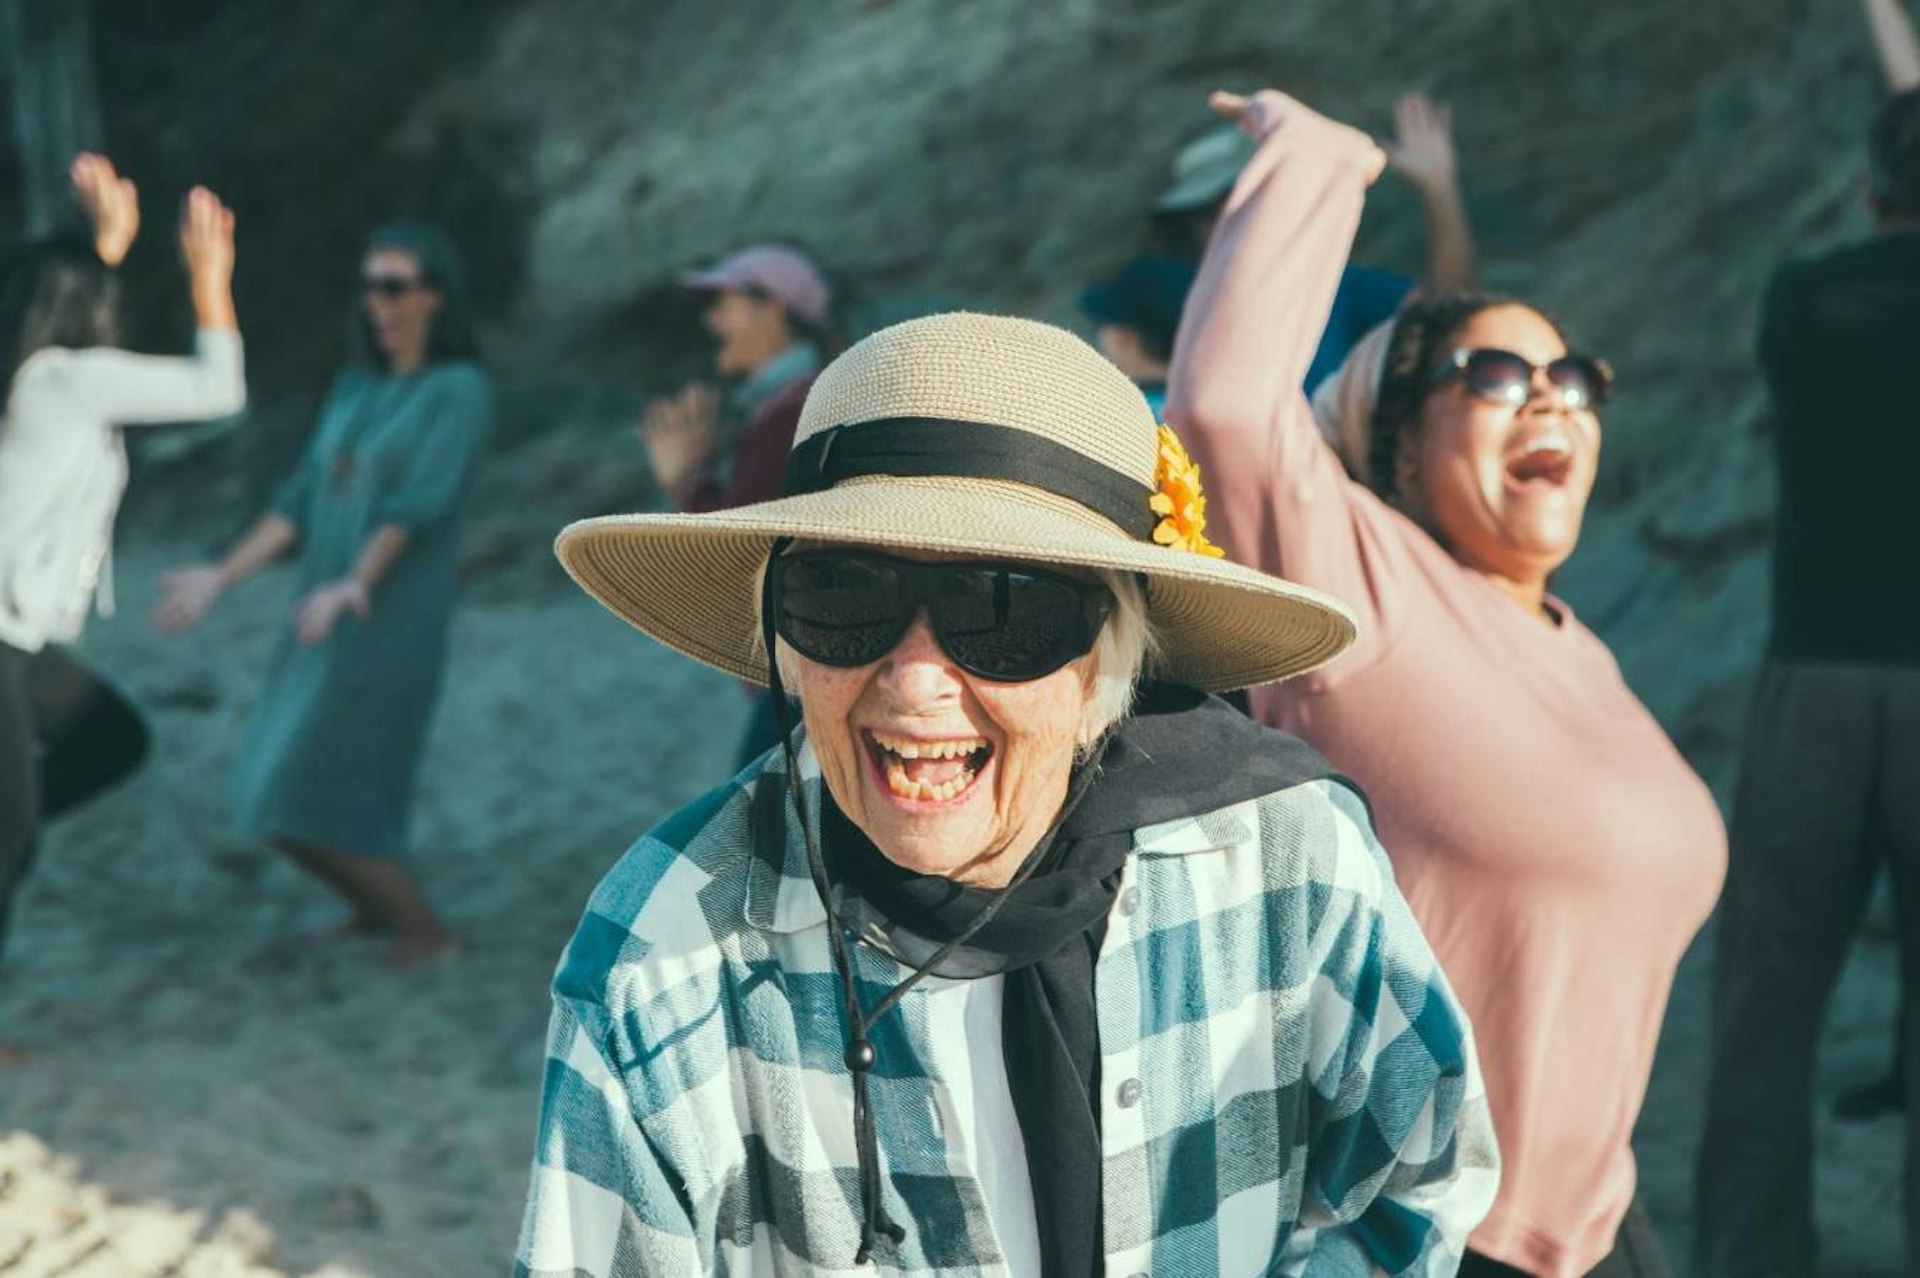 An elderly lady, wearing a hat and sunglasses, laughs in the direction of the camera, while participating in a laughter yoga class in Laguna Beach, California.